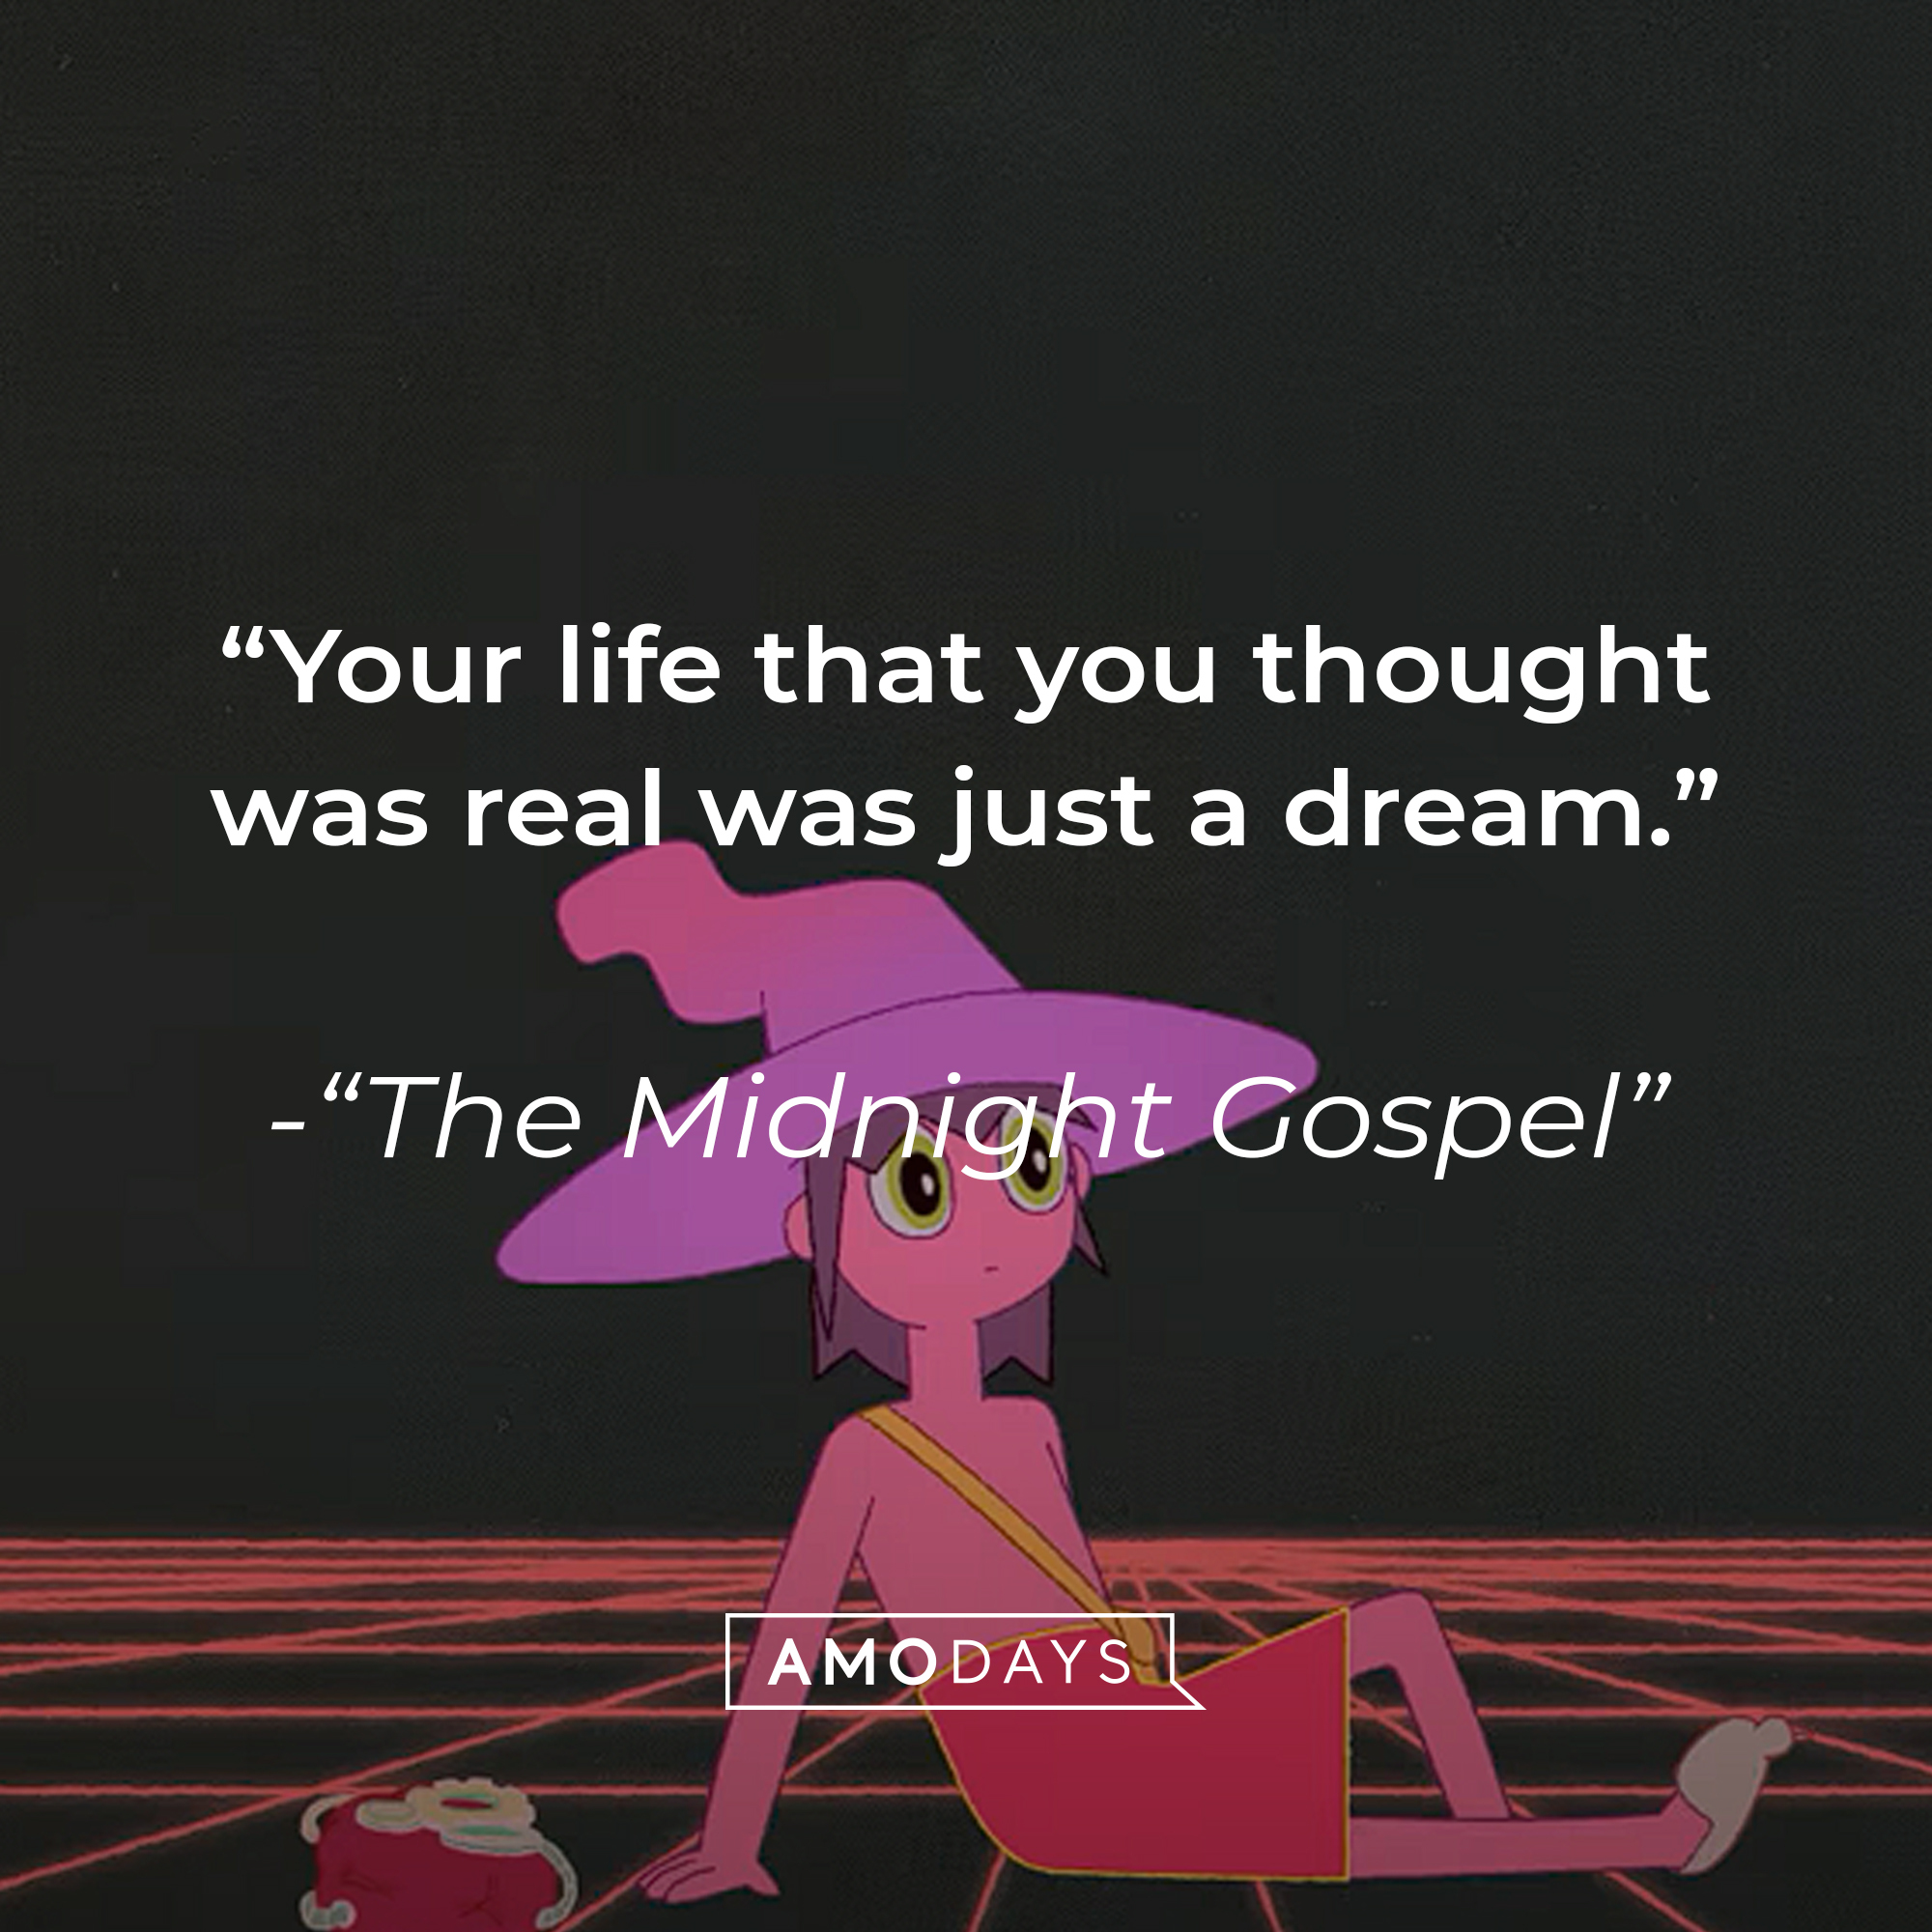 Quote from "The Midnight Gospel": "Your life that you thought was real was just a dream." | Source: youtube.com/Netflix